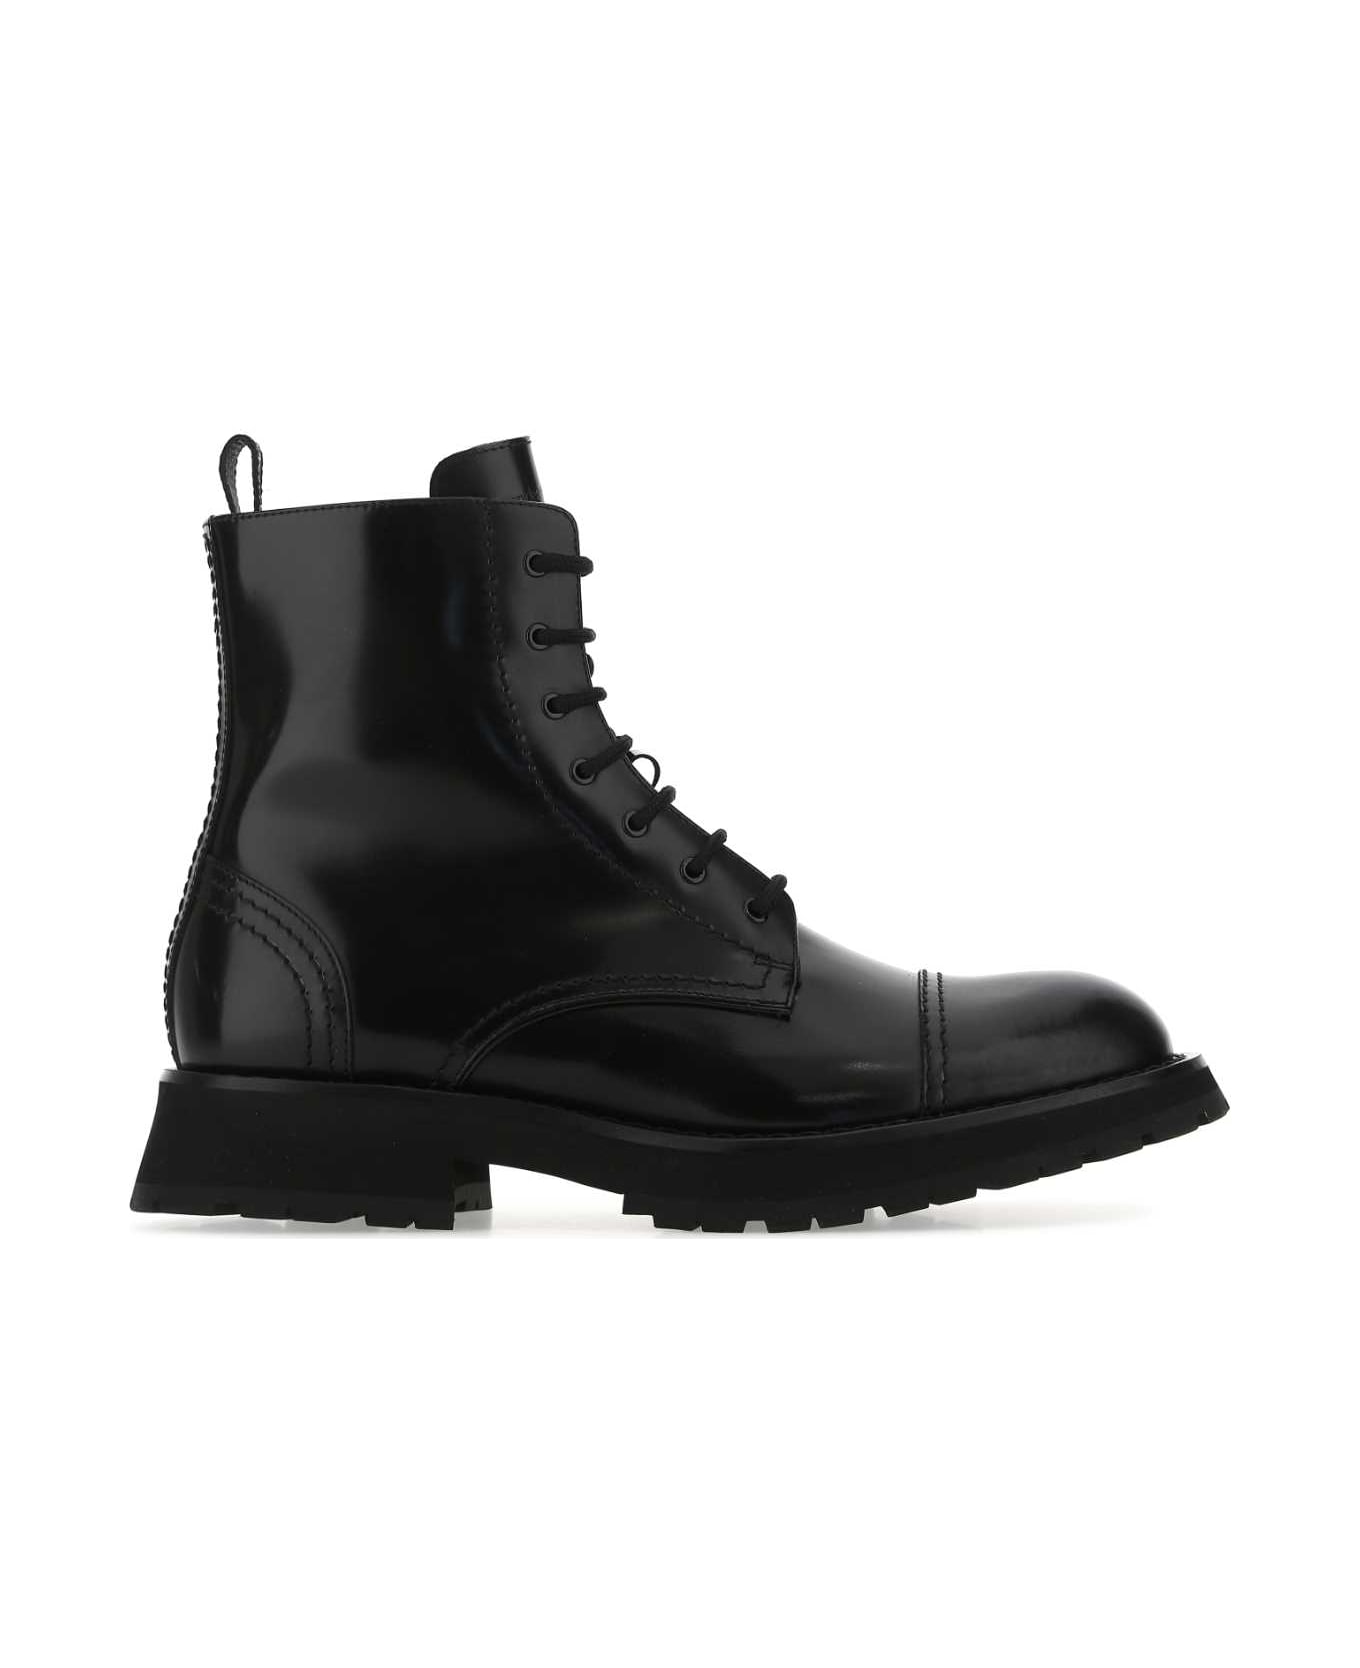 Alexander McQueen Black Leather Ankle Boots - 1000